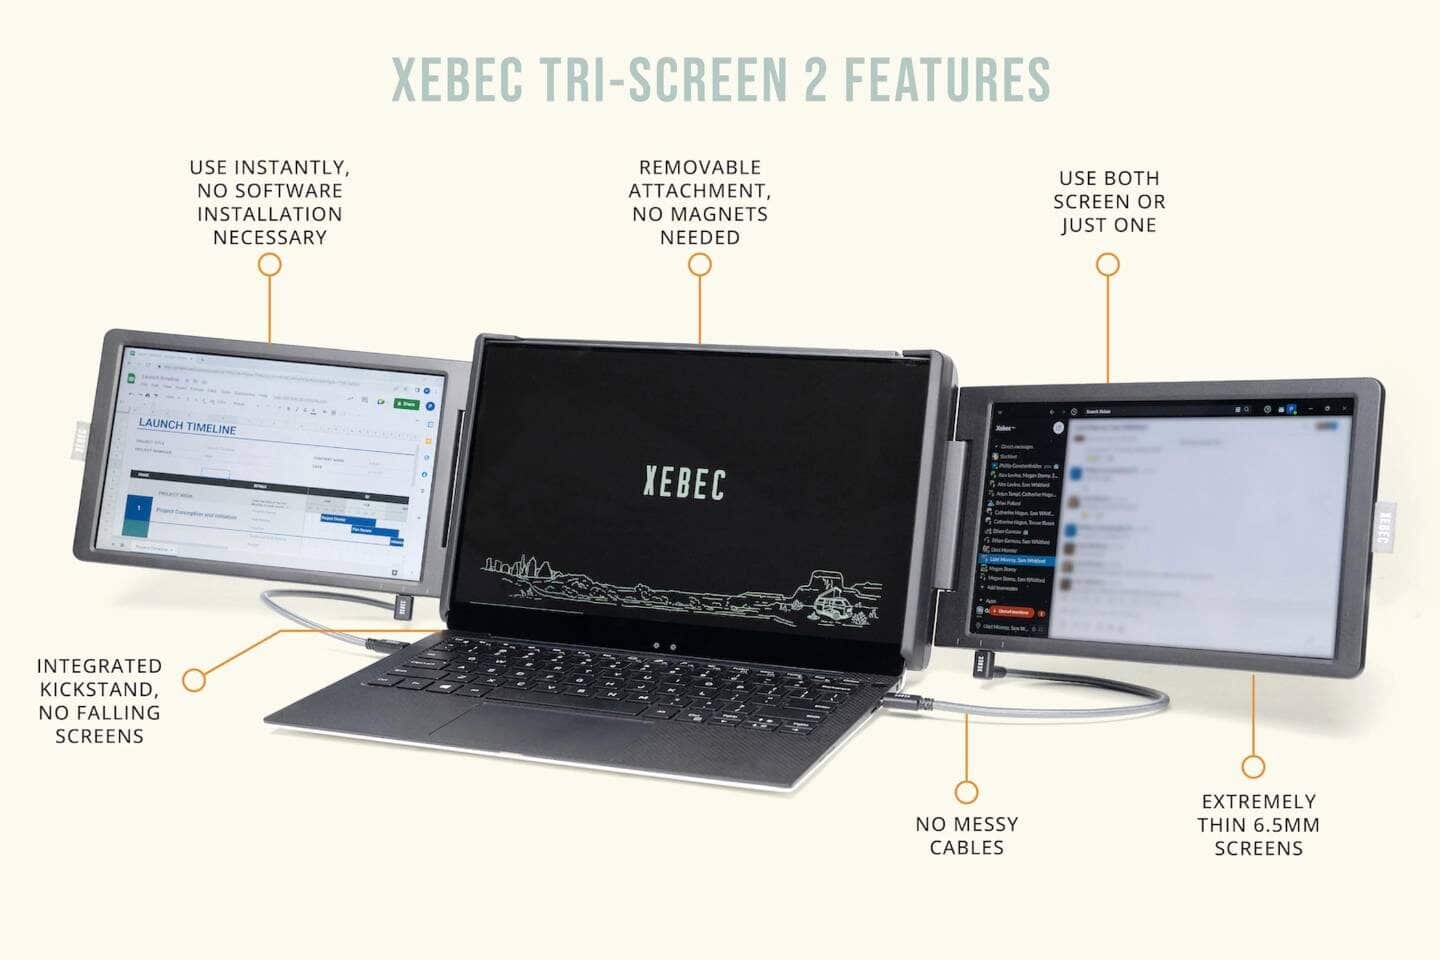 Features of Xebec Tri-Screen 2